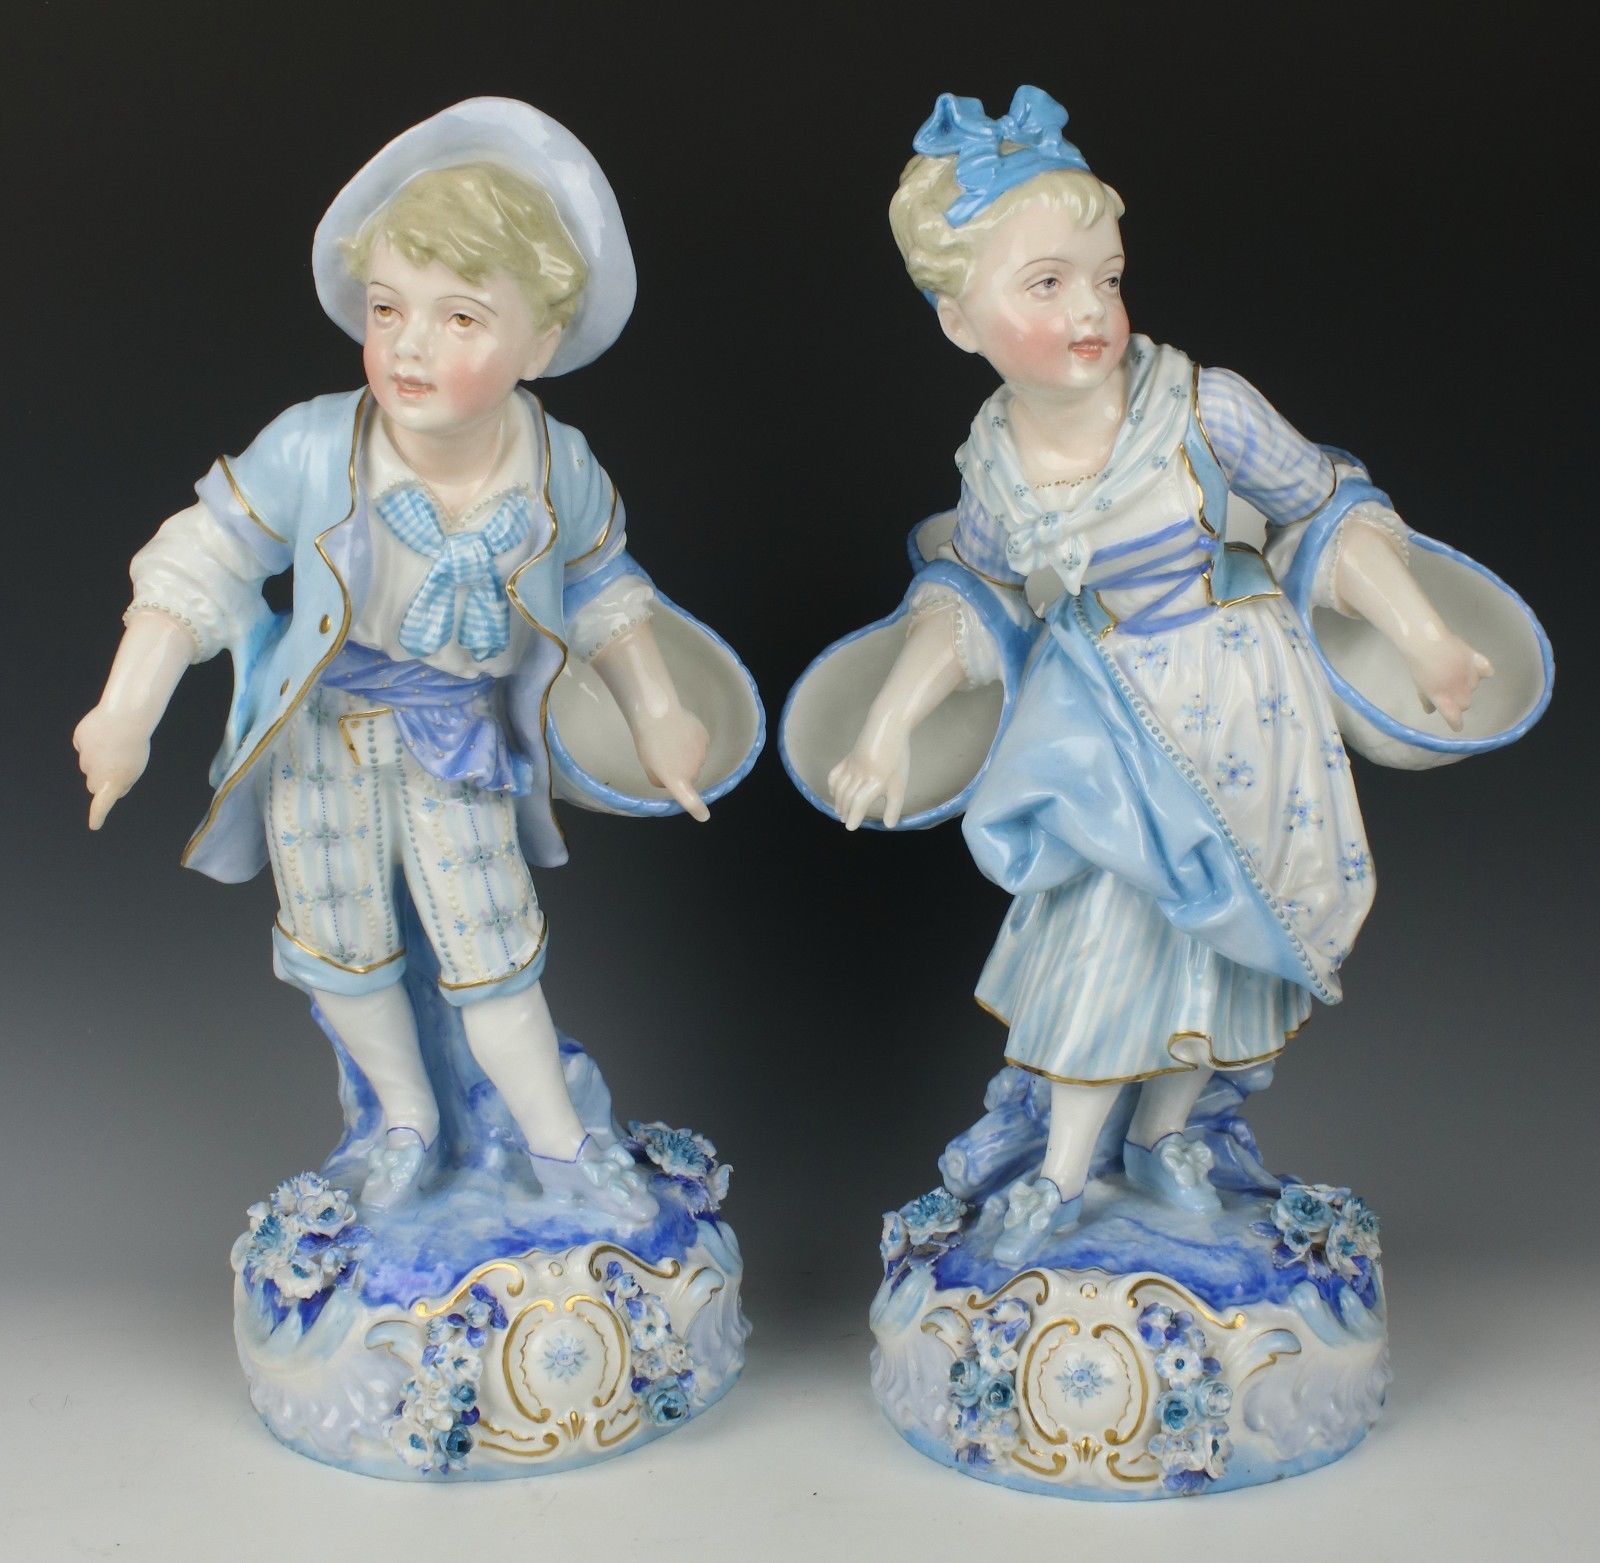 Antique 19C french Levy & Cie pair of figurines Boy and Girl with Baskets